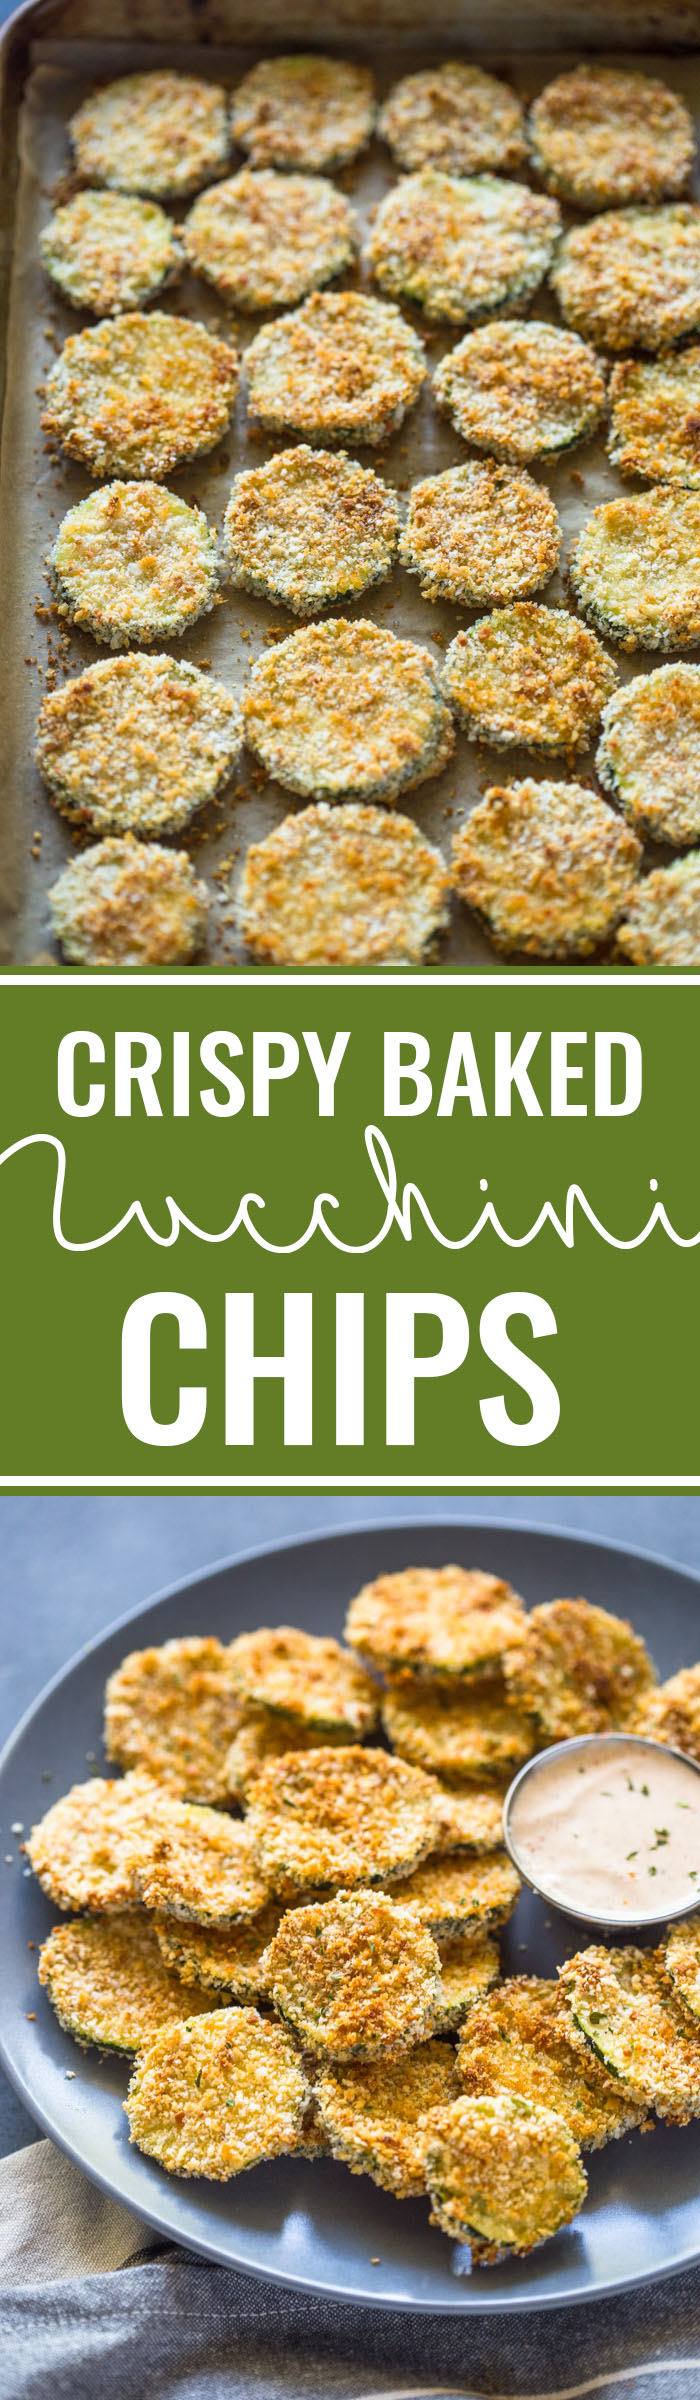 Healthy Crispy Baked Zucchini Chips